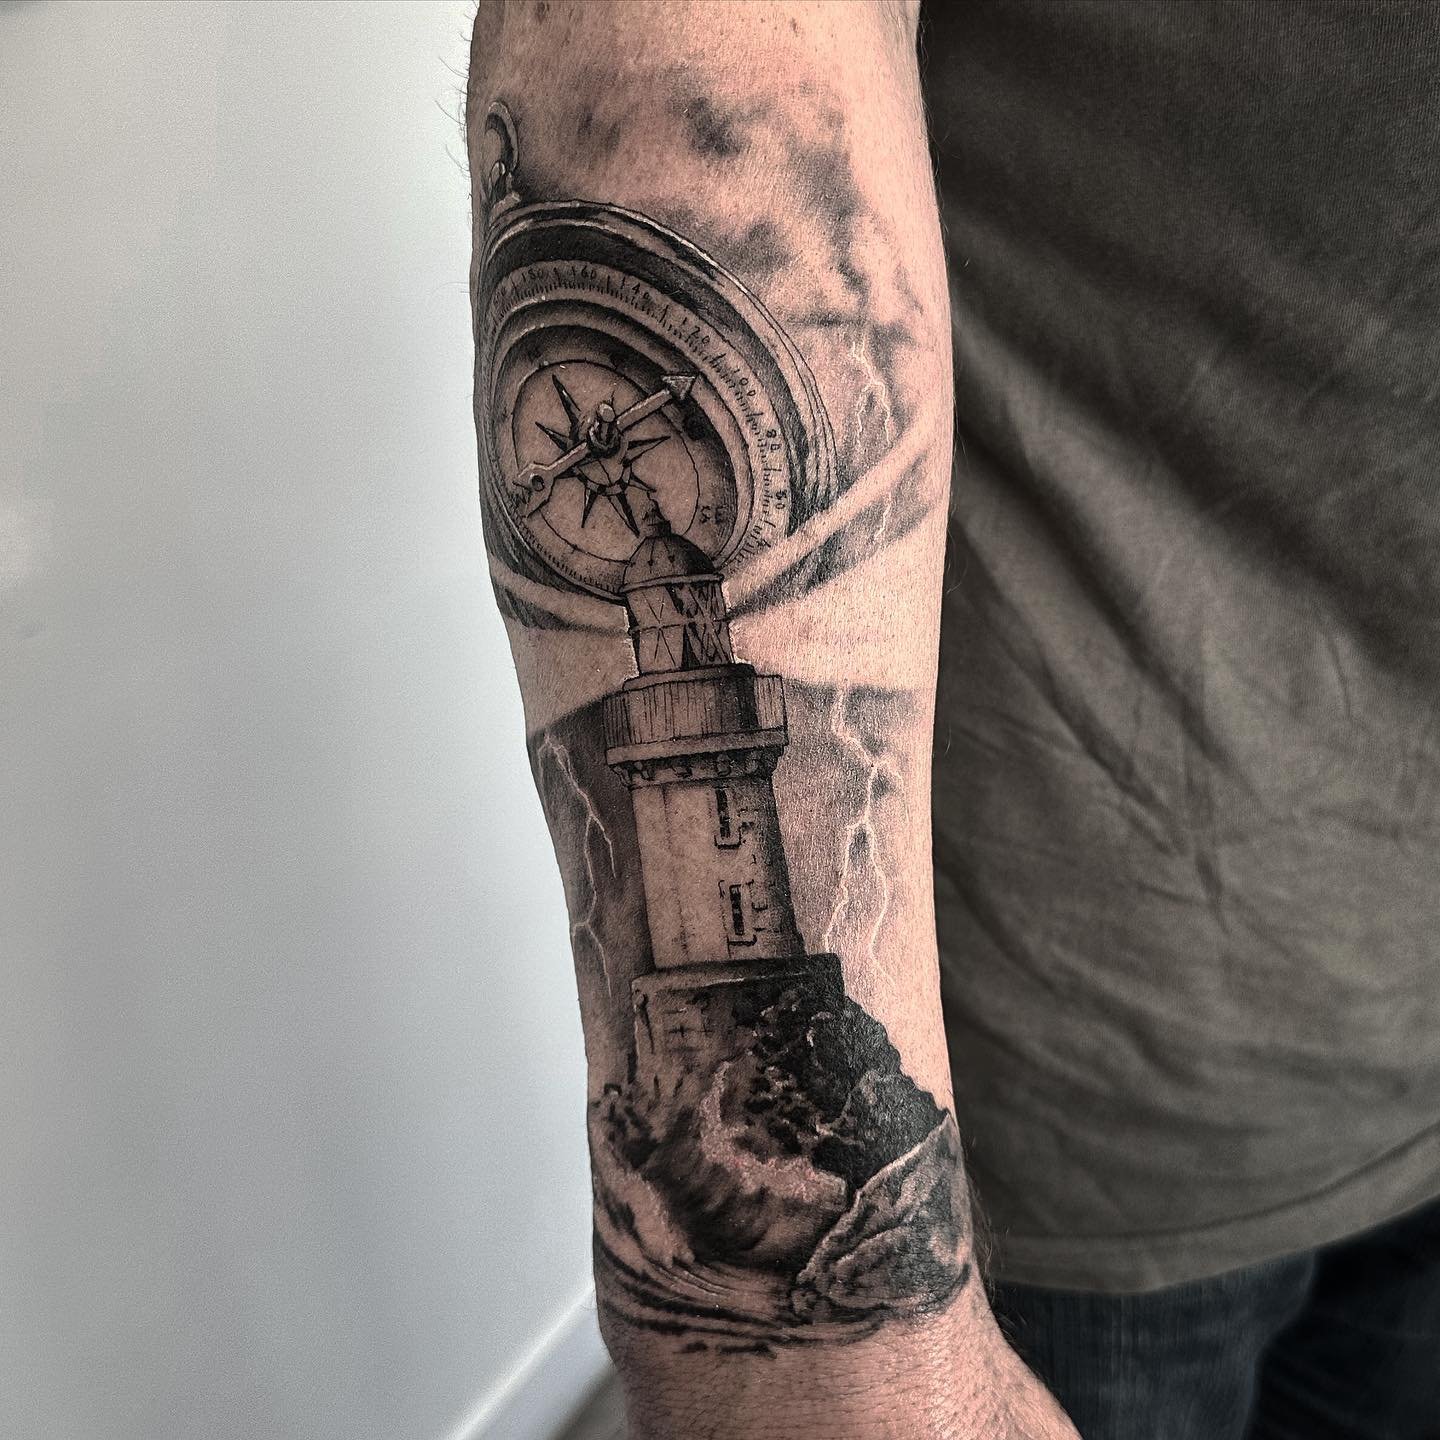 Lighthouse, compass and stormy sky for Glen 👍
.
.
.
.
.
.
#lighthouse #realism #compass